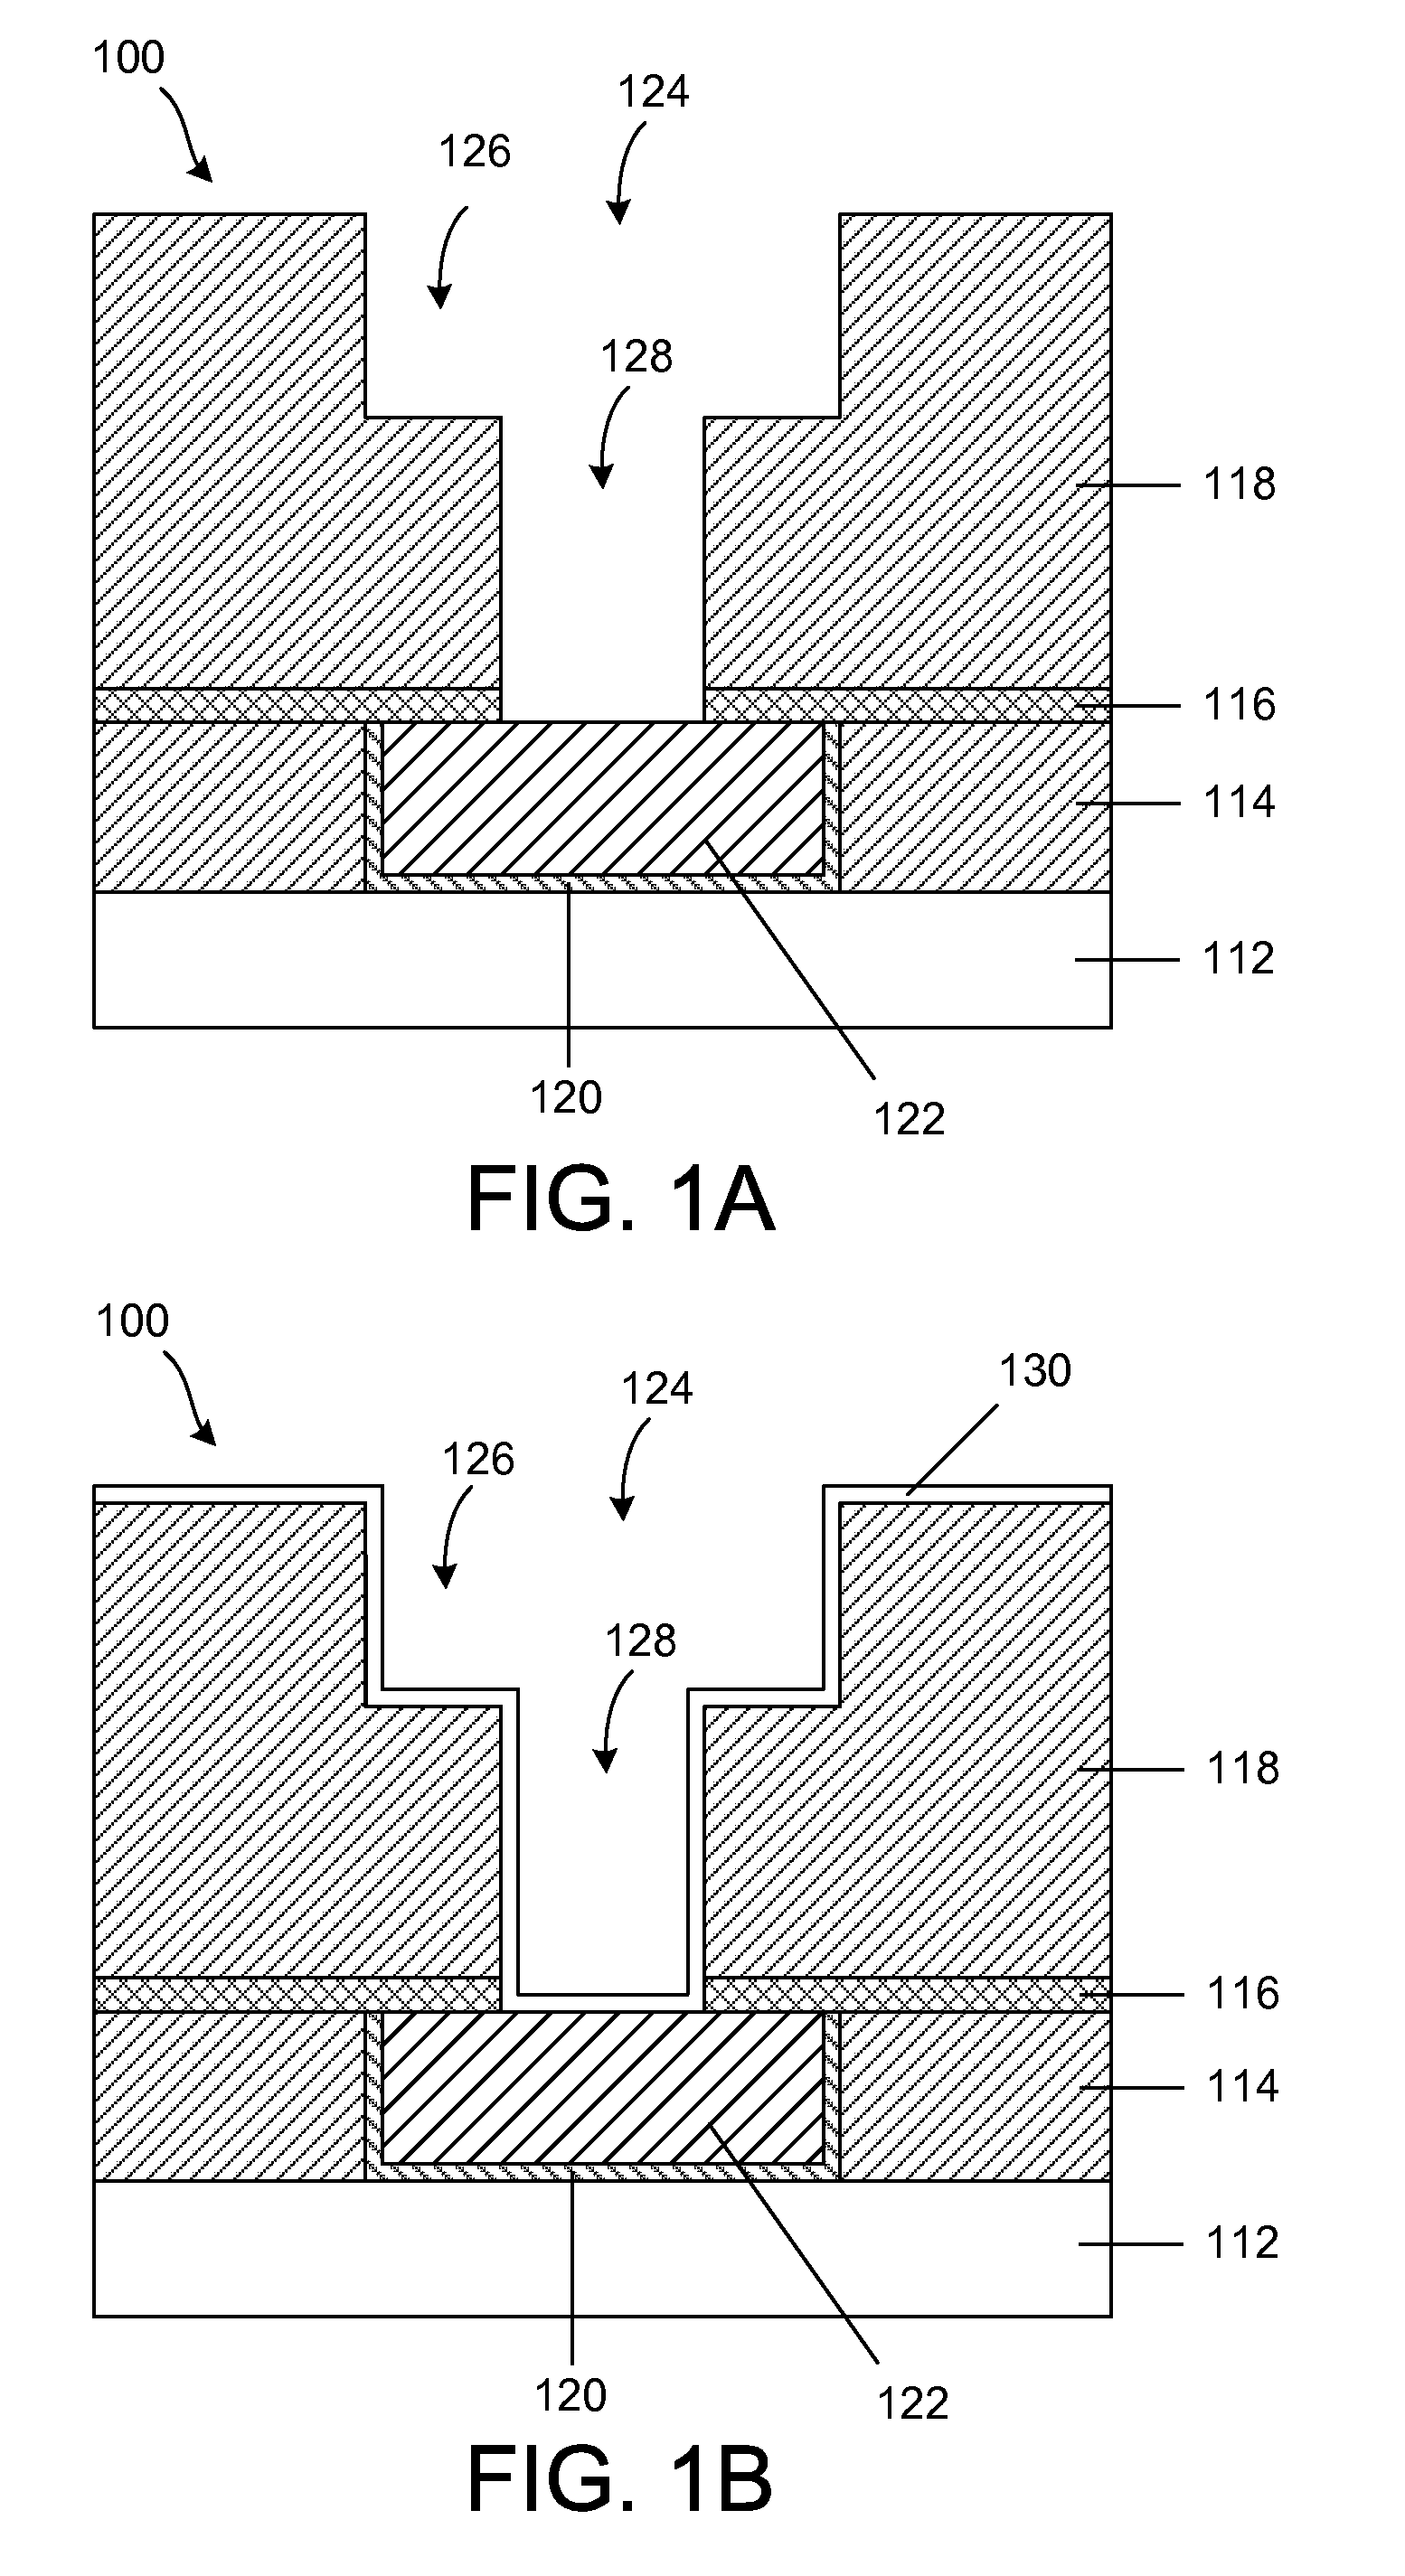 Method of forming a diffusion barrier and adhesion layer for an interconnect structure